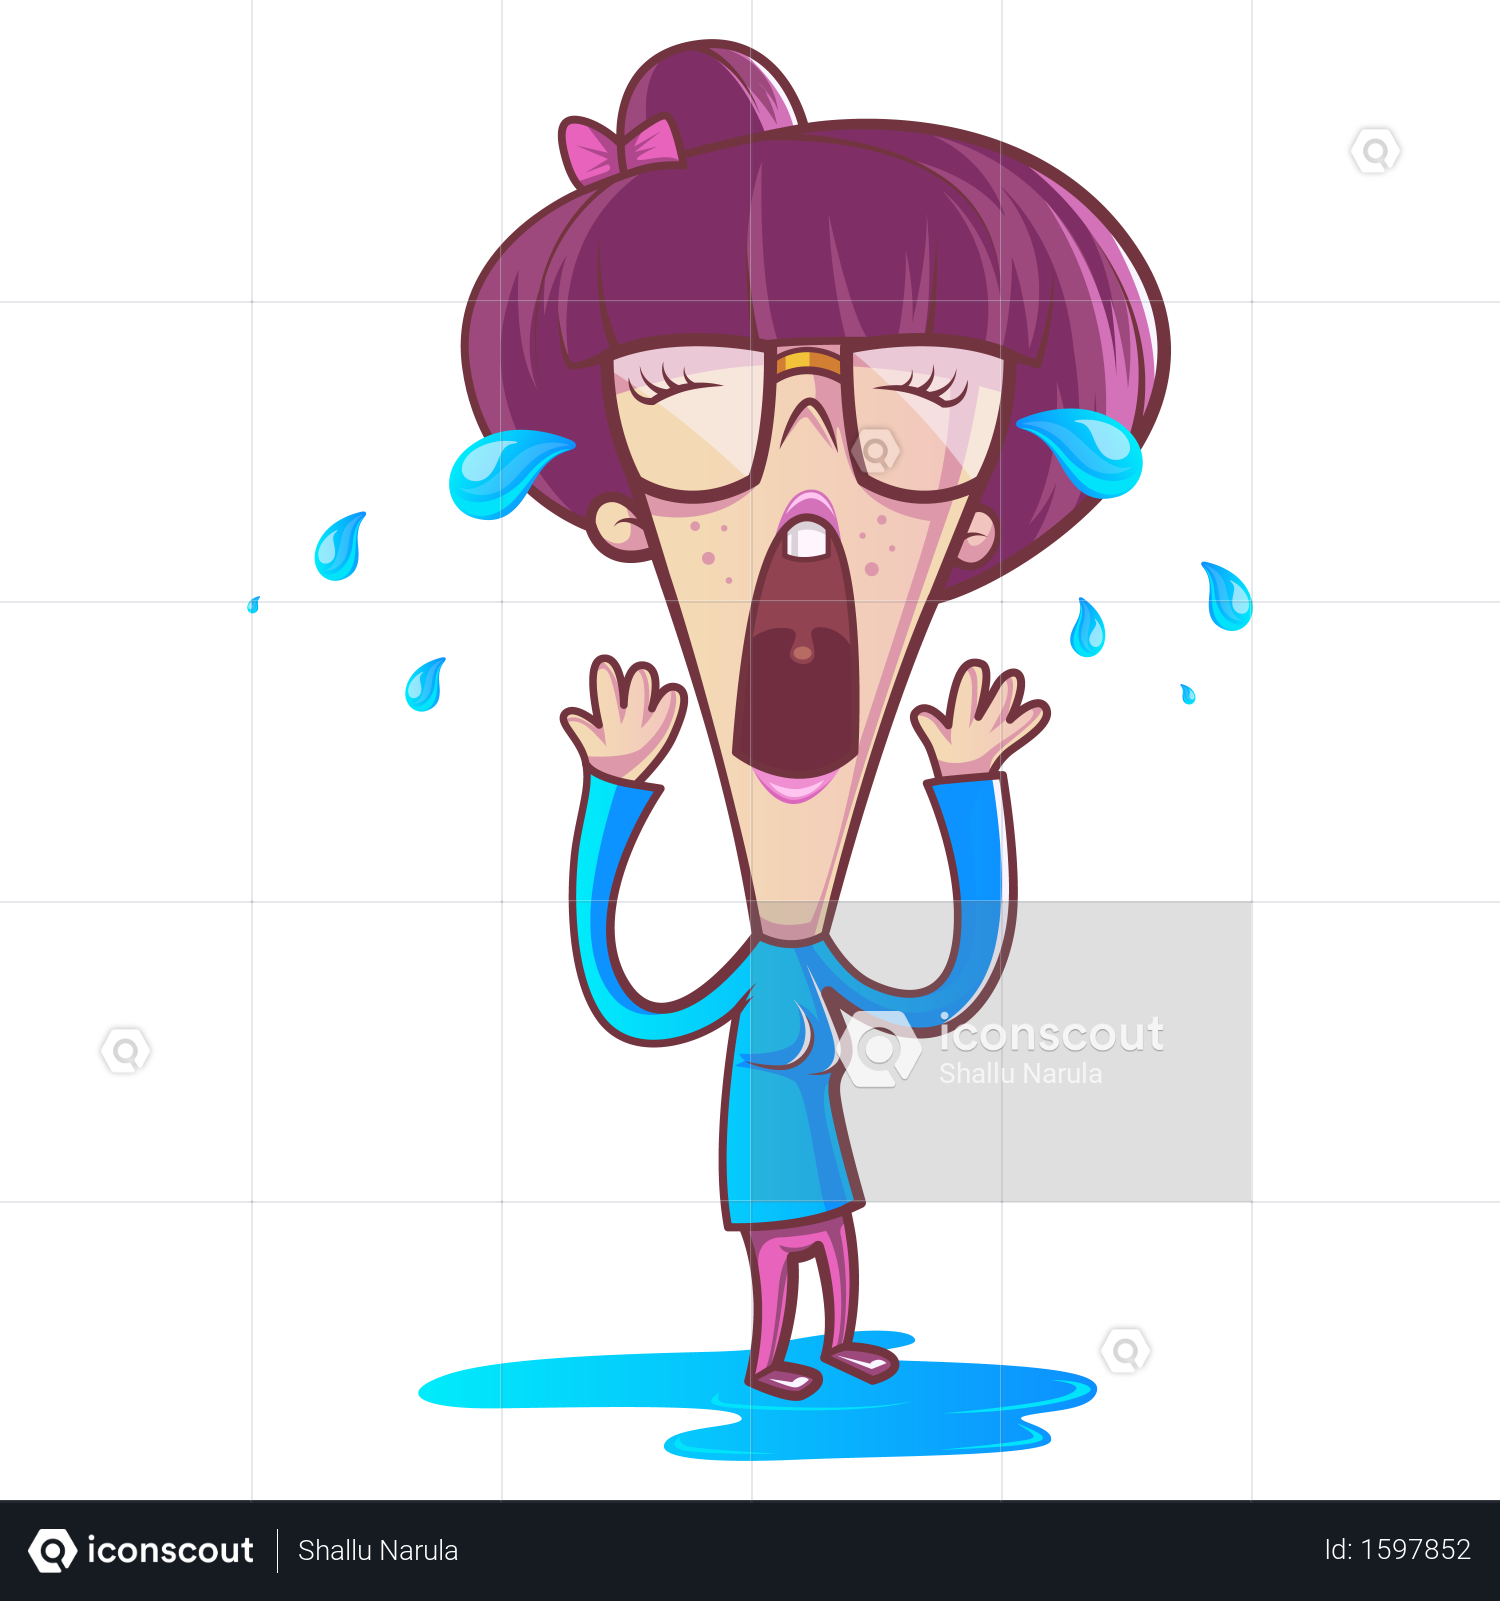 Download Premium Illustration of cute girl is crying Illustration download in PNG & Vector format